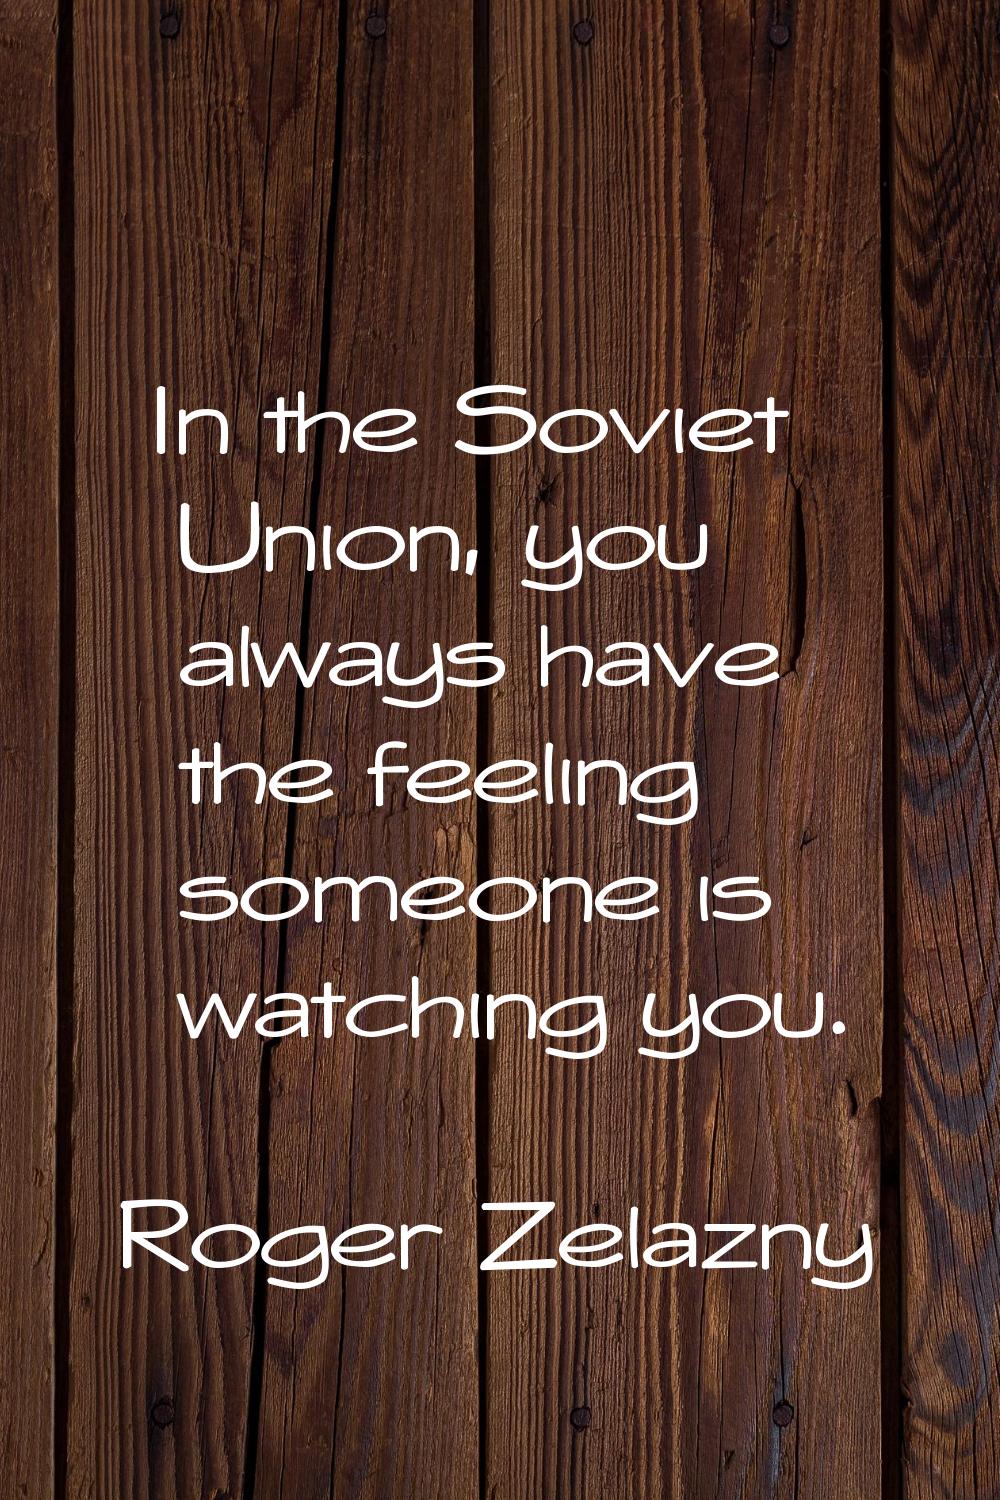 In the Soviet Union, you always have the feeling someone is watching you.